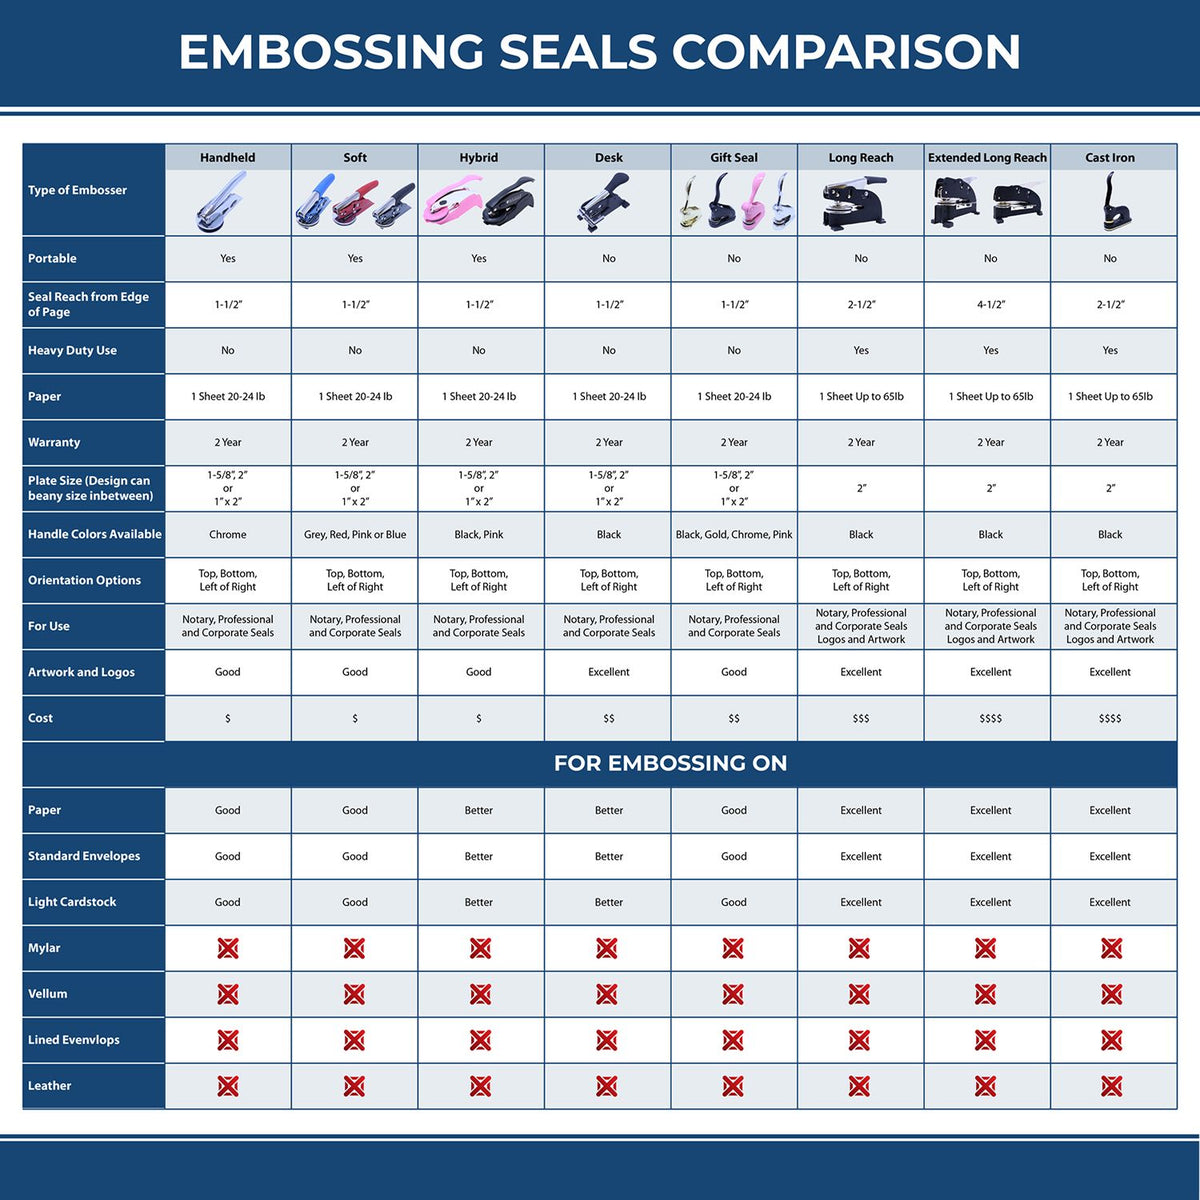 A comparison chart for the different types of mount models available for the Heavy Duty Cast Iron Connecticut Engineer Seal Embosser.